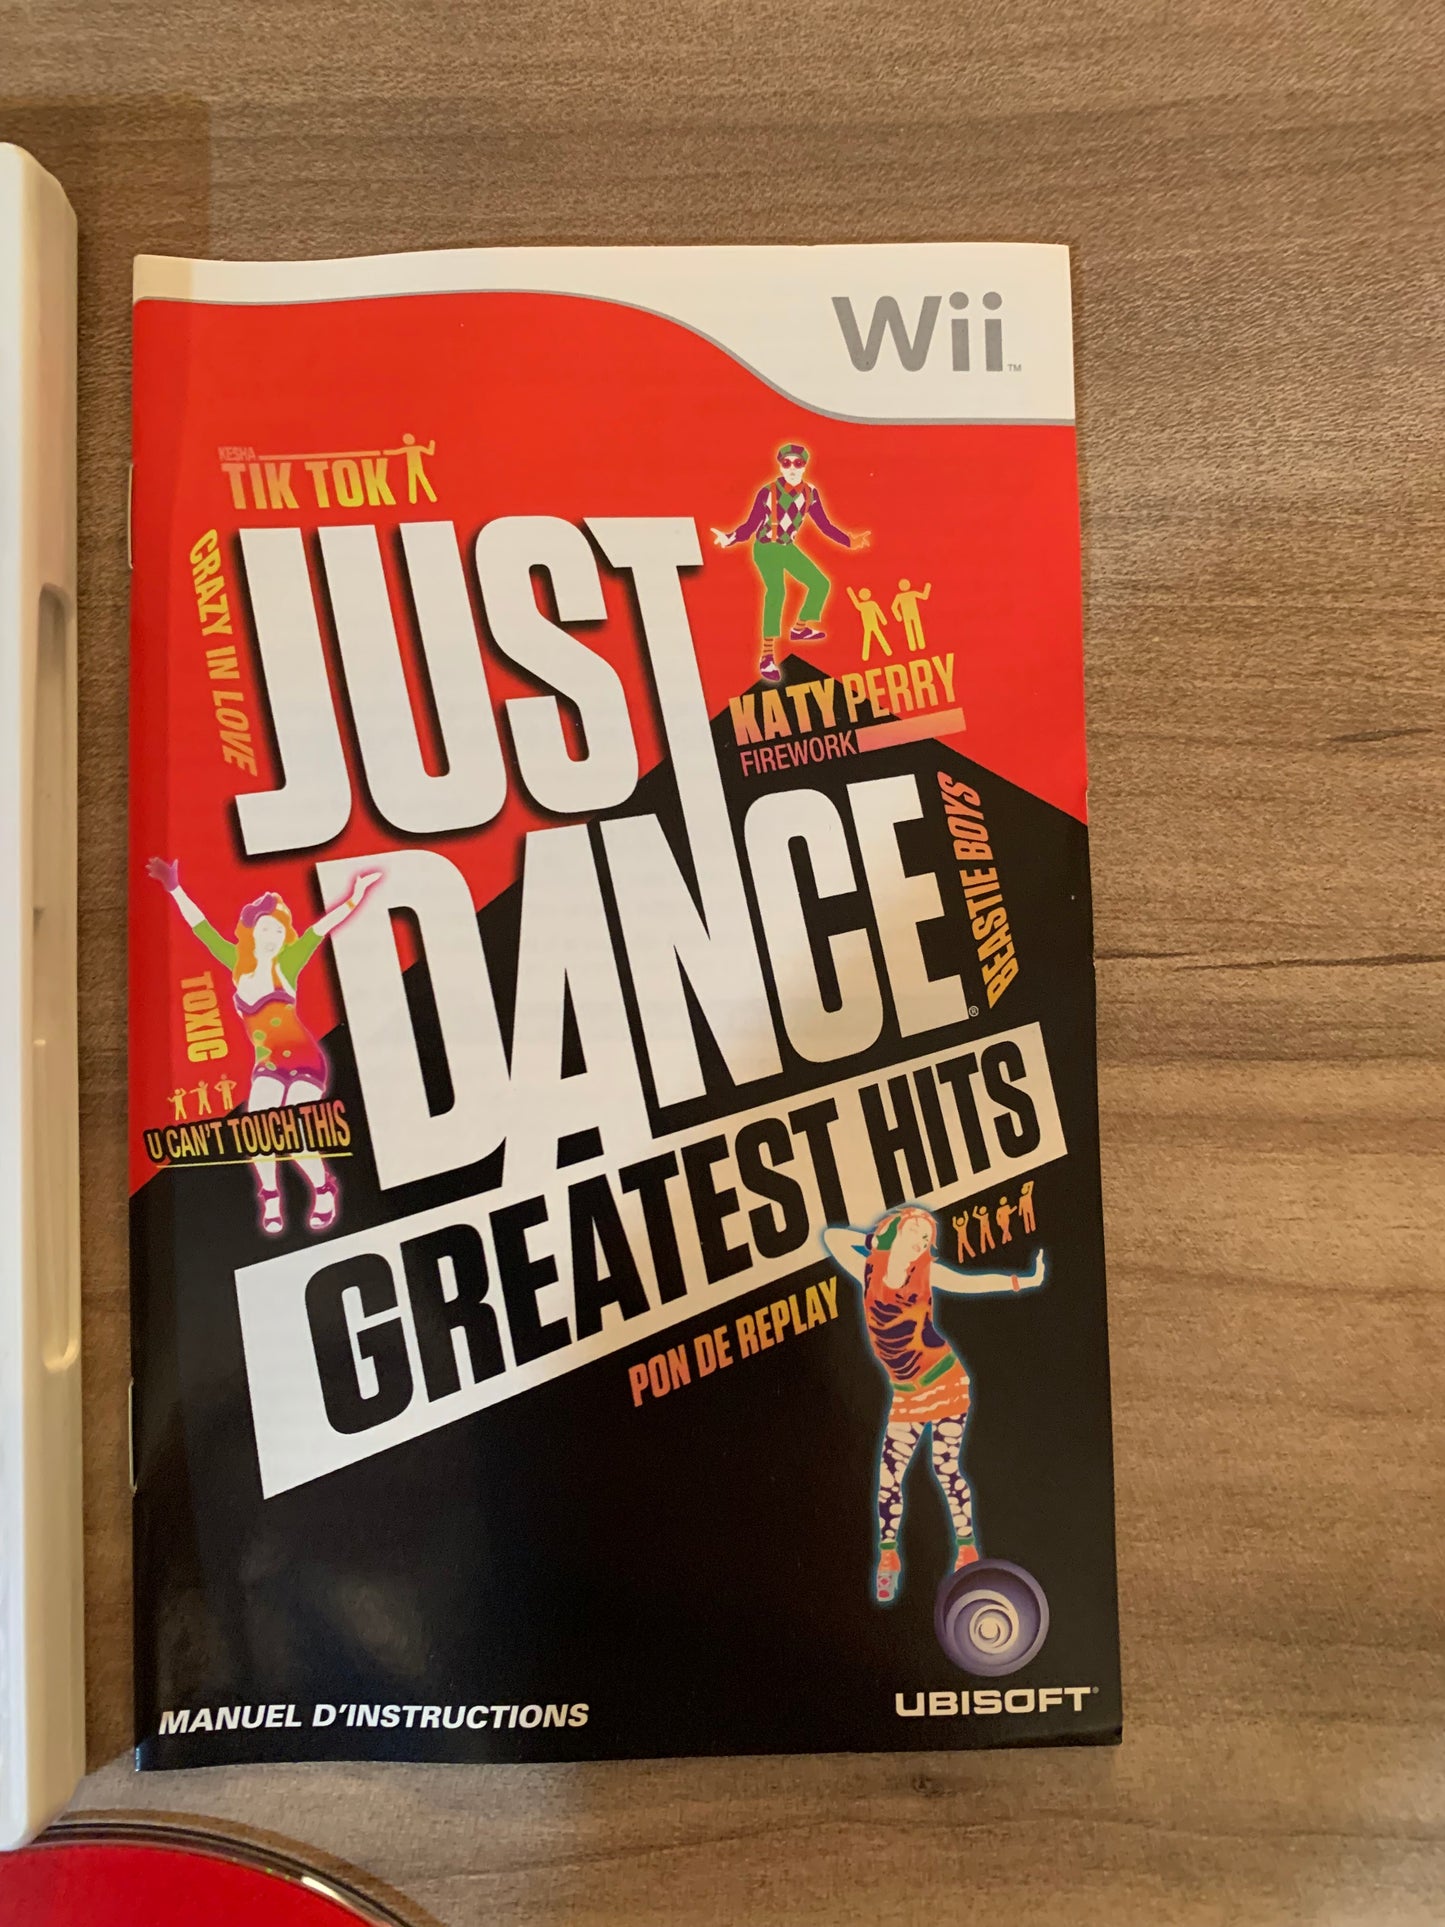 NiNTENDO Wii | JUST DANCE GREATEST HiTS